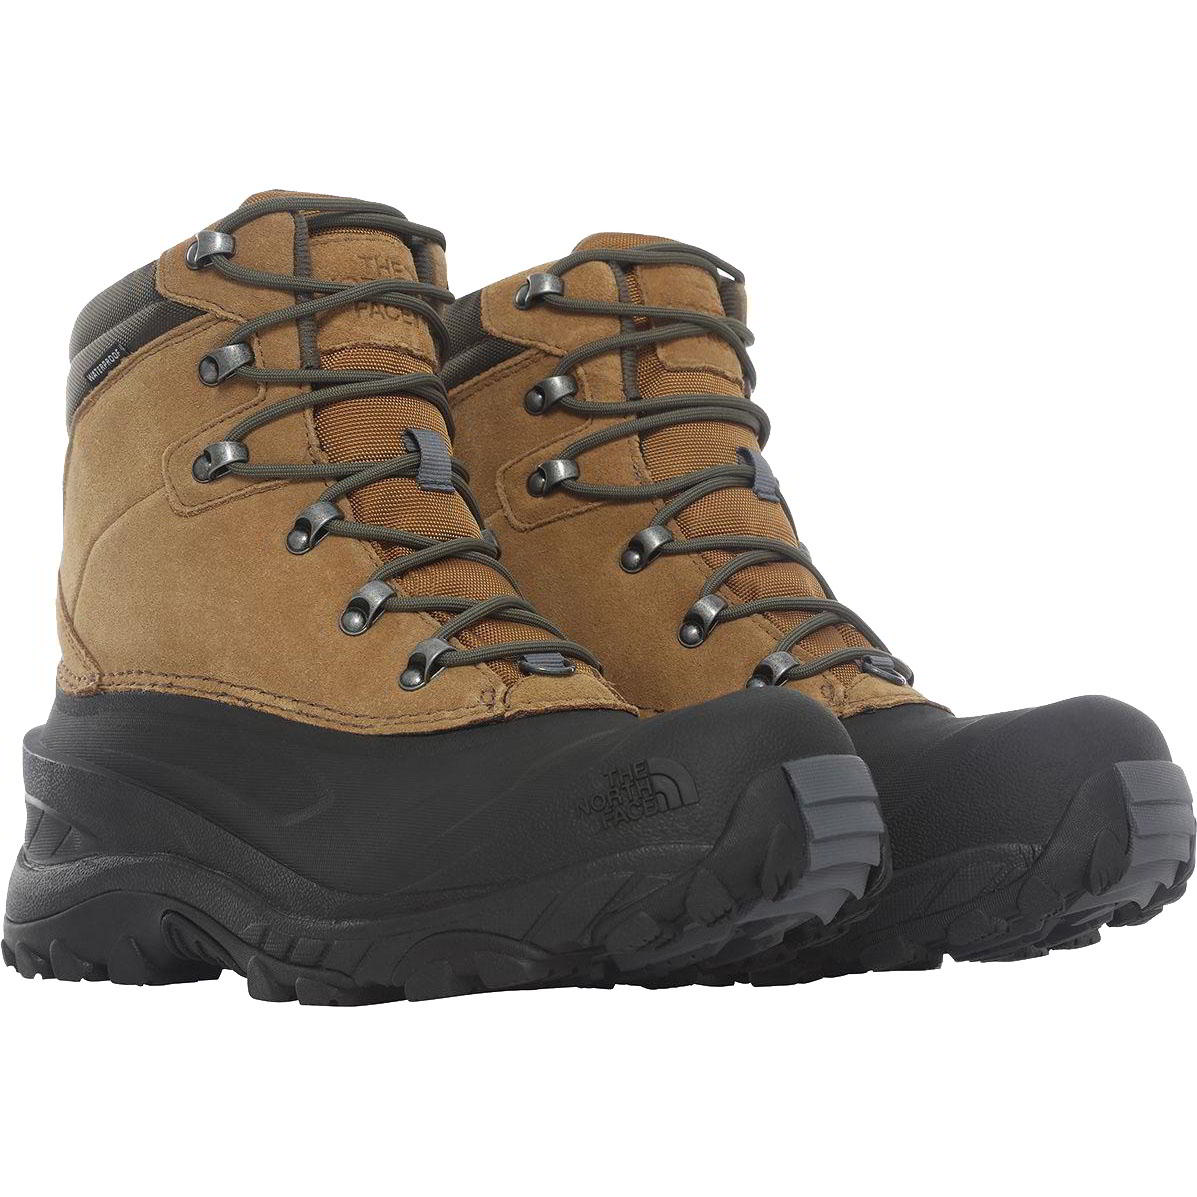 The North Face Mens Chilkat IV Waterproof Walking Boots - Utility Brown New Taupe Green 2951